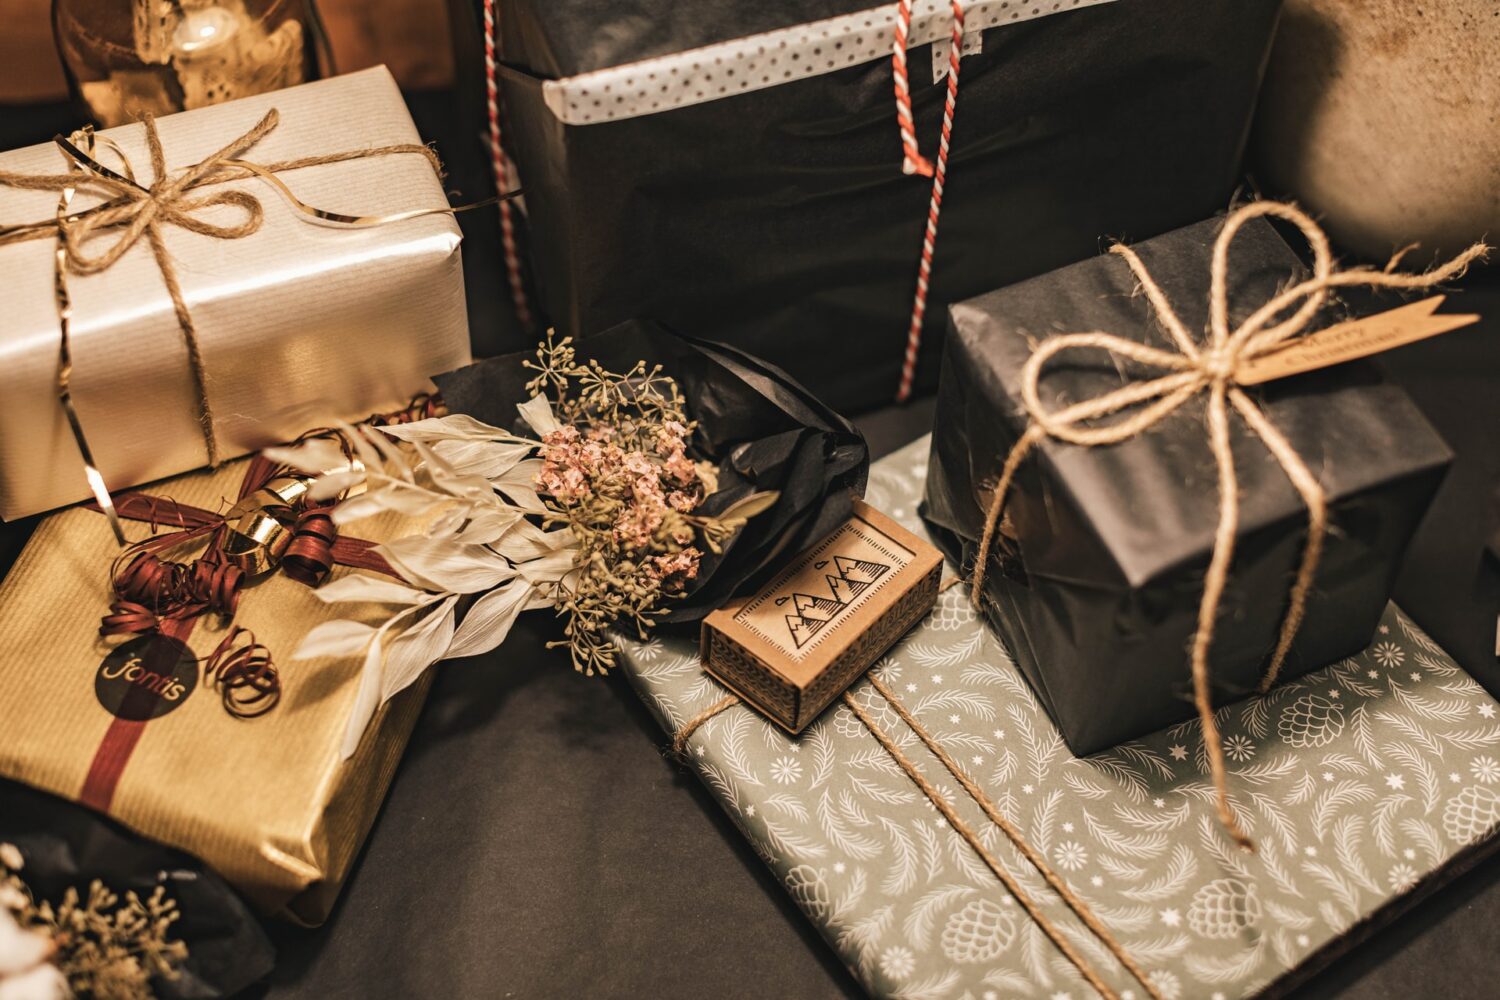 4 Thoughtful Gift Ideas for the Holidays